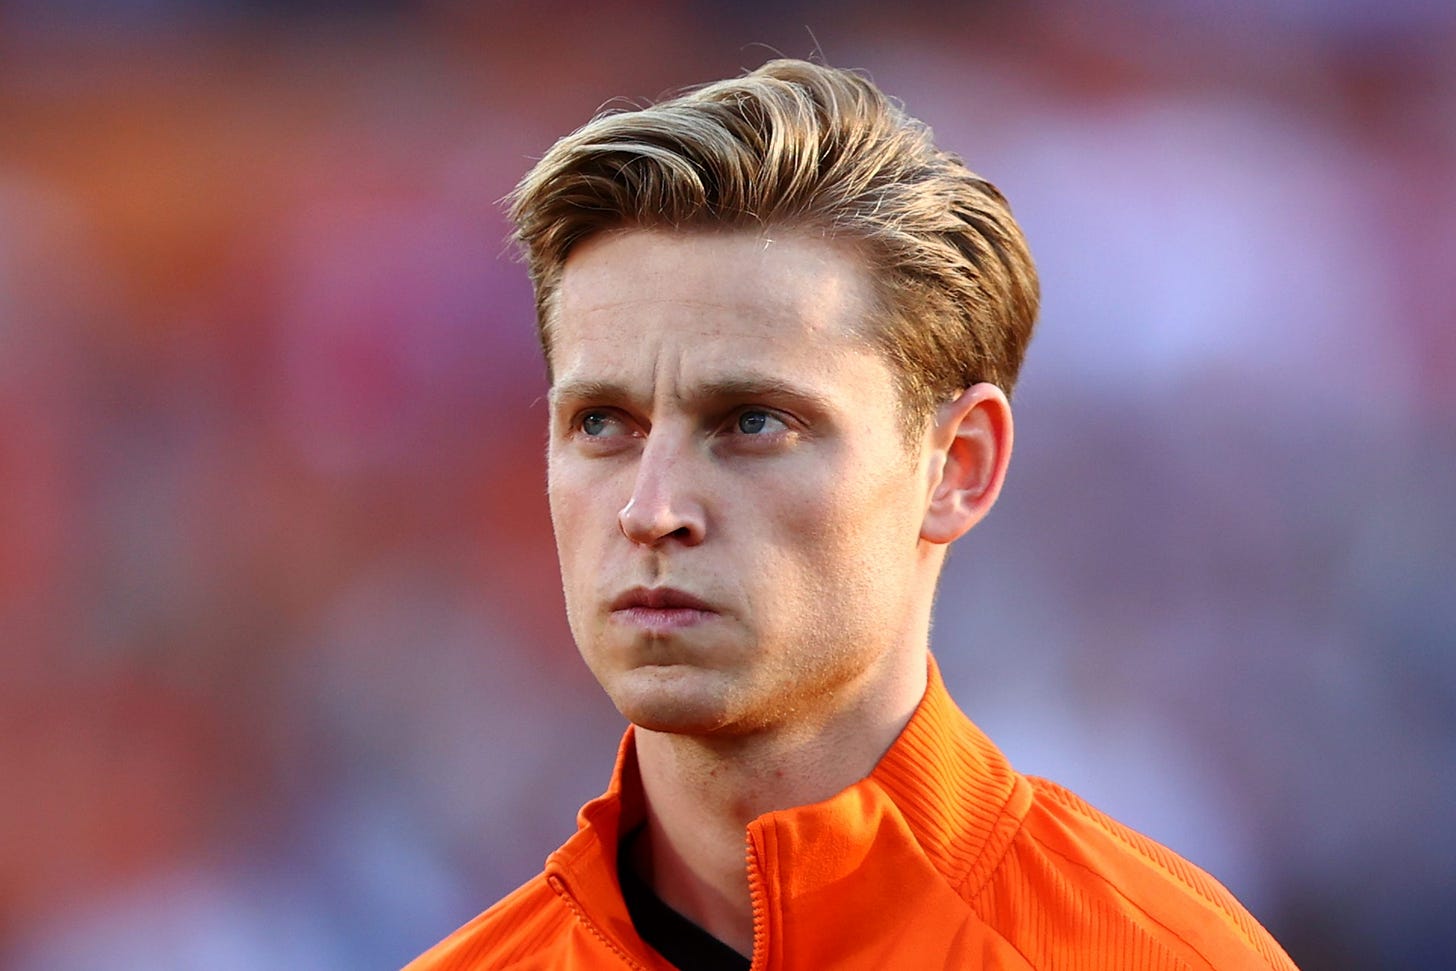 De Jong has not rejected Man United, seeking clarity on deferred payments  before negotiations | Barca Universal